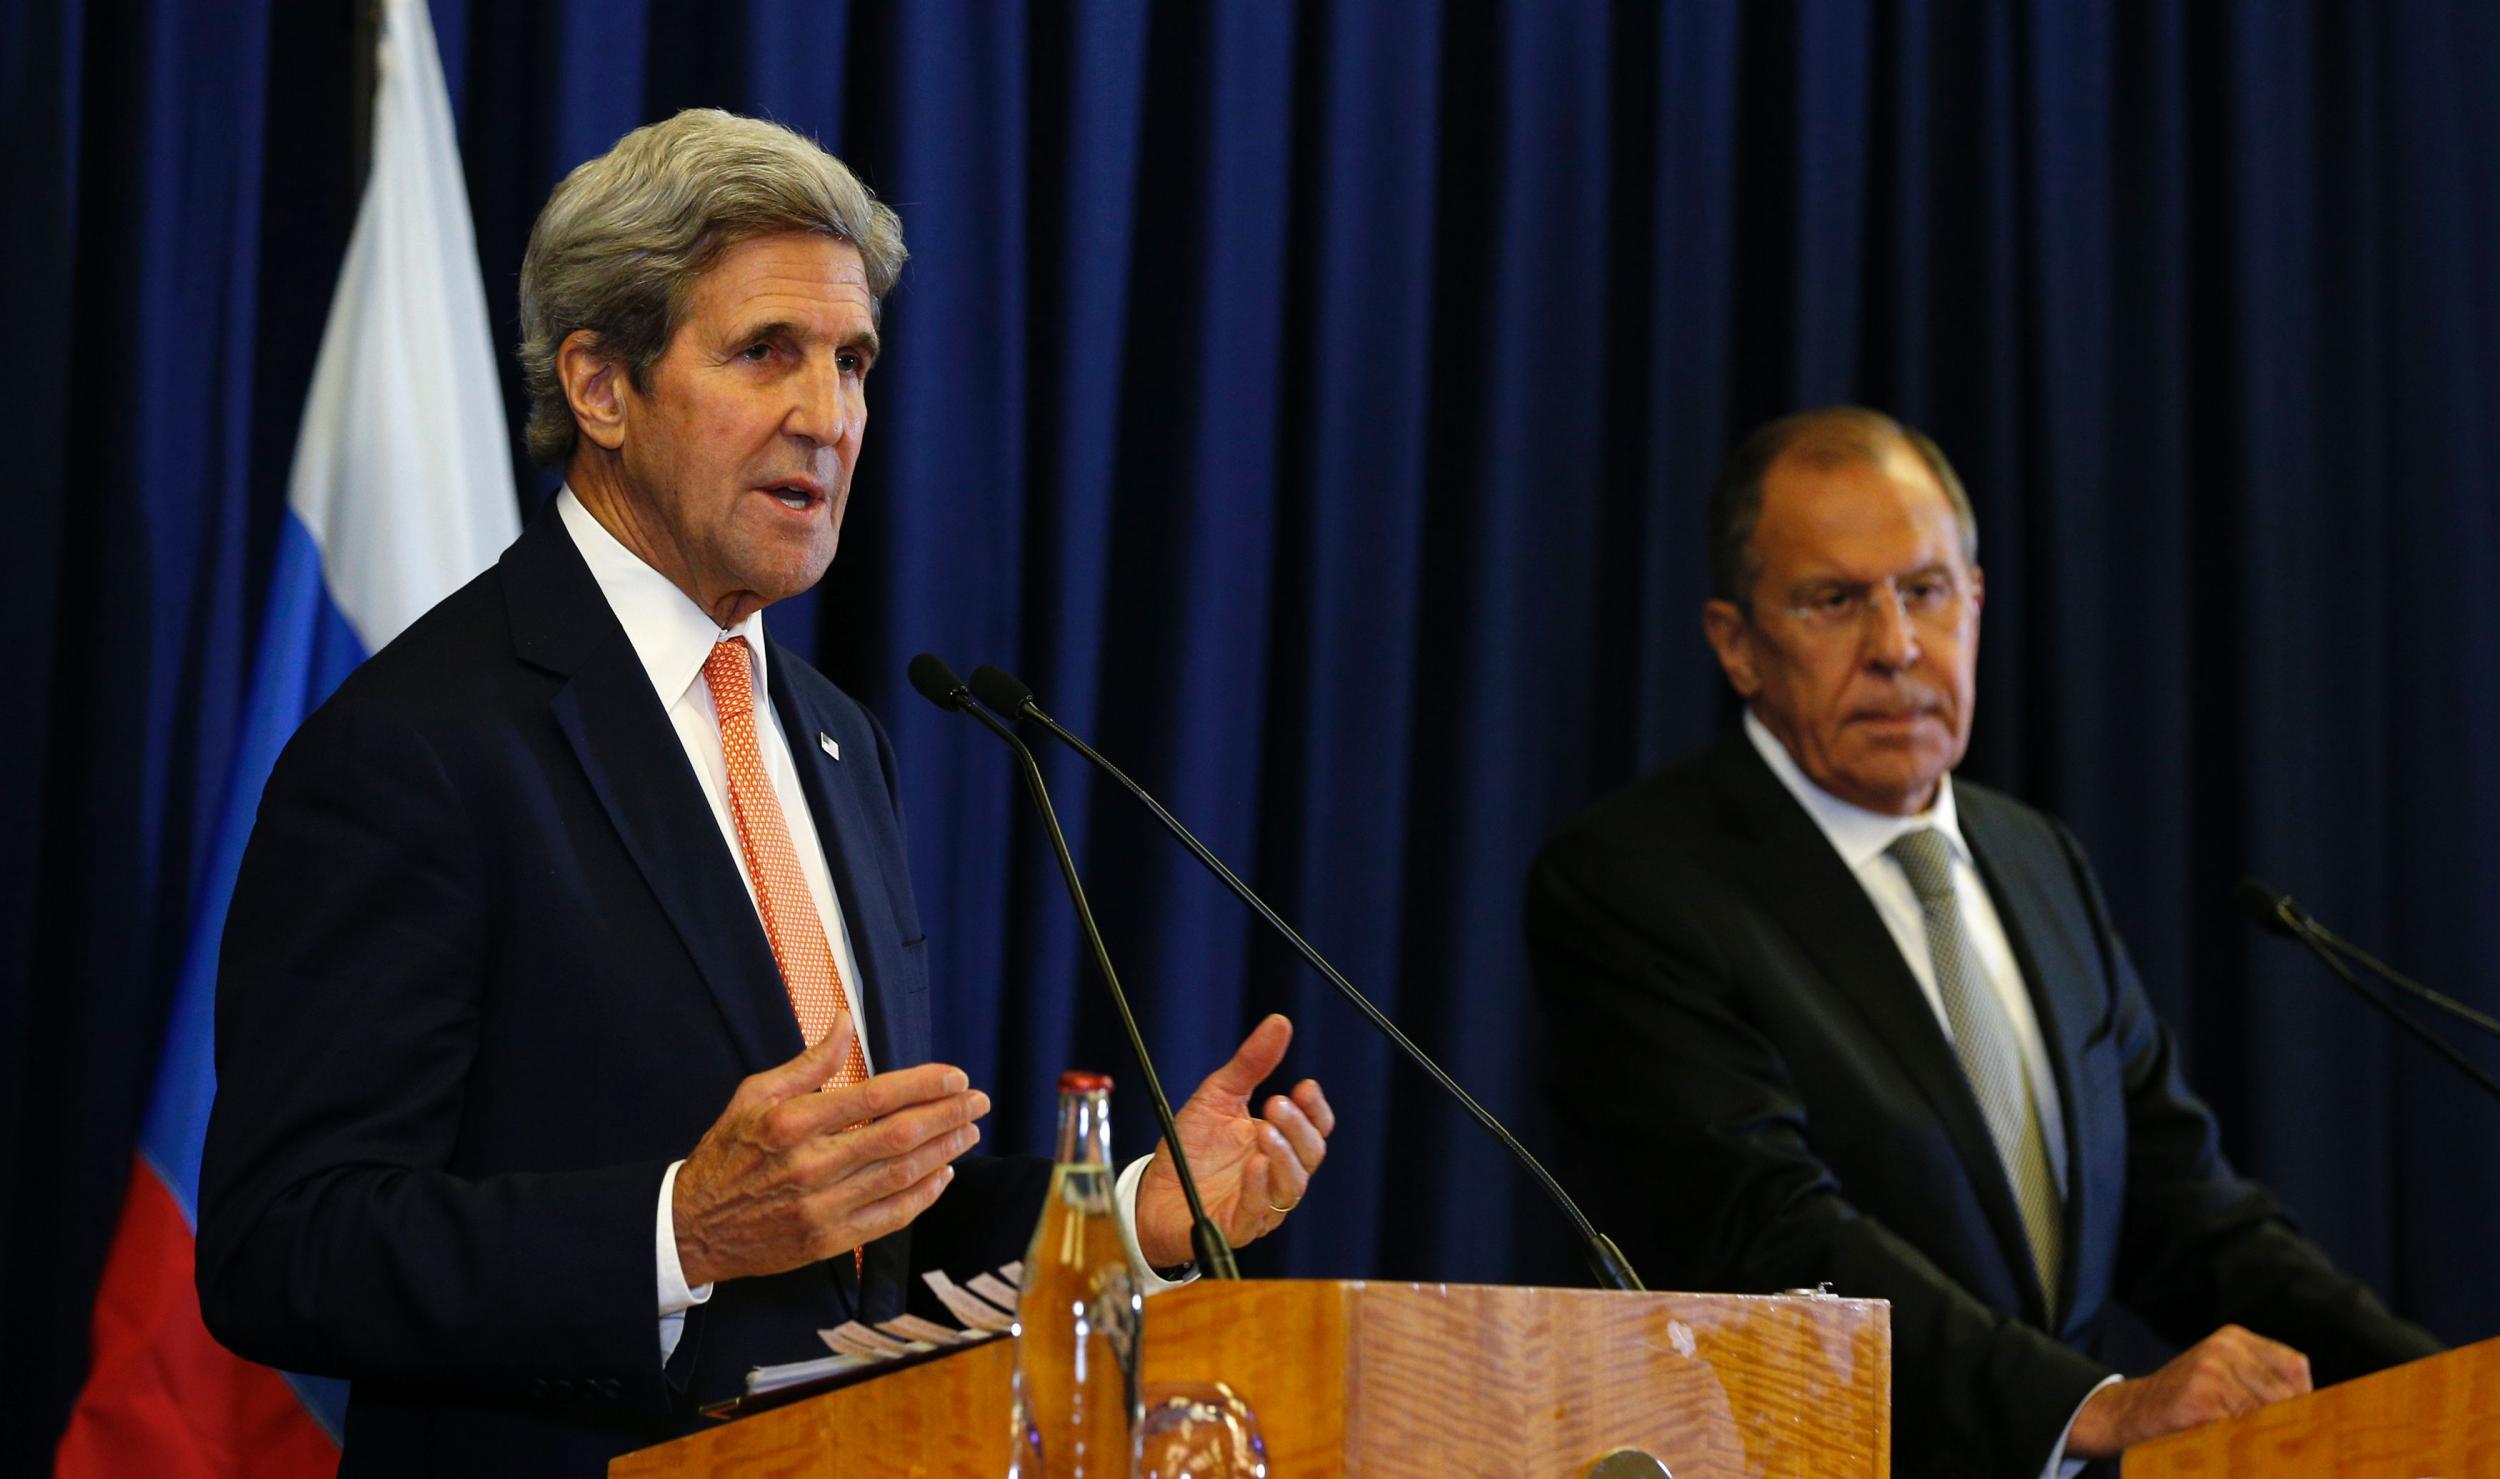 US Secretary of State John Kerry (L) and Russian Foreign Minister Sergei Lavrov attend a press conference after meetings to discuss the Syrian crisis went late into the evening on September 9, 2016, in Geneva. The United State and Russia on Friday agreed a plan to impose a ceasefire in the Syrian civil war and lay the foundation of a peace process, US Secretary of State John Kerry said.